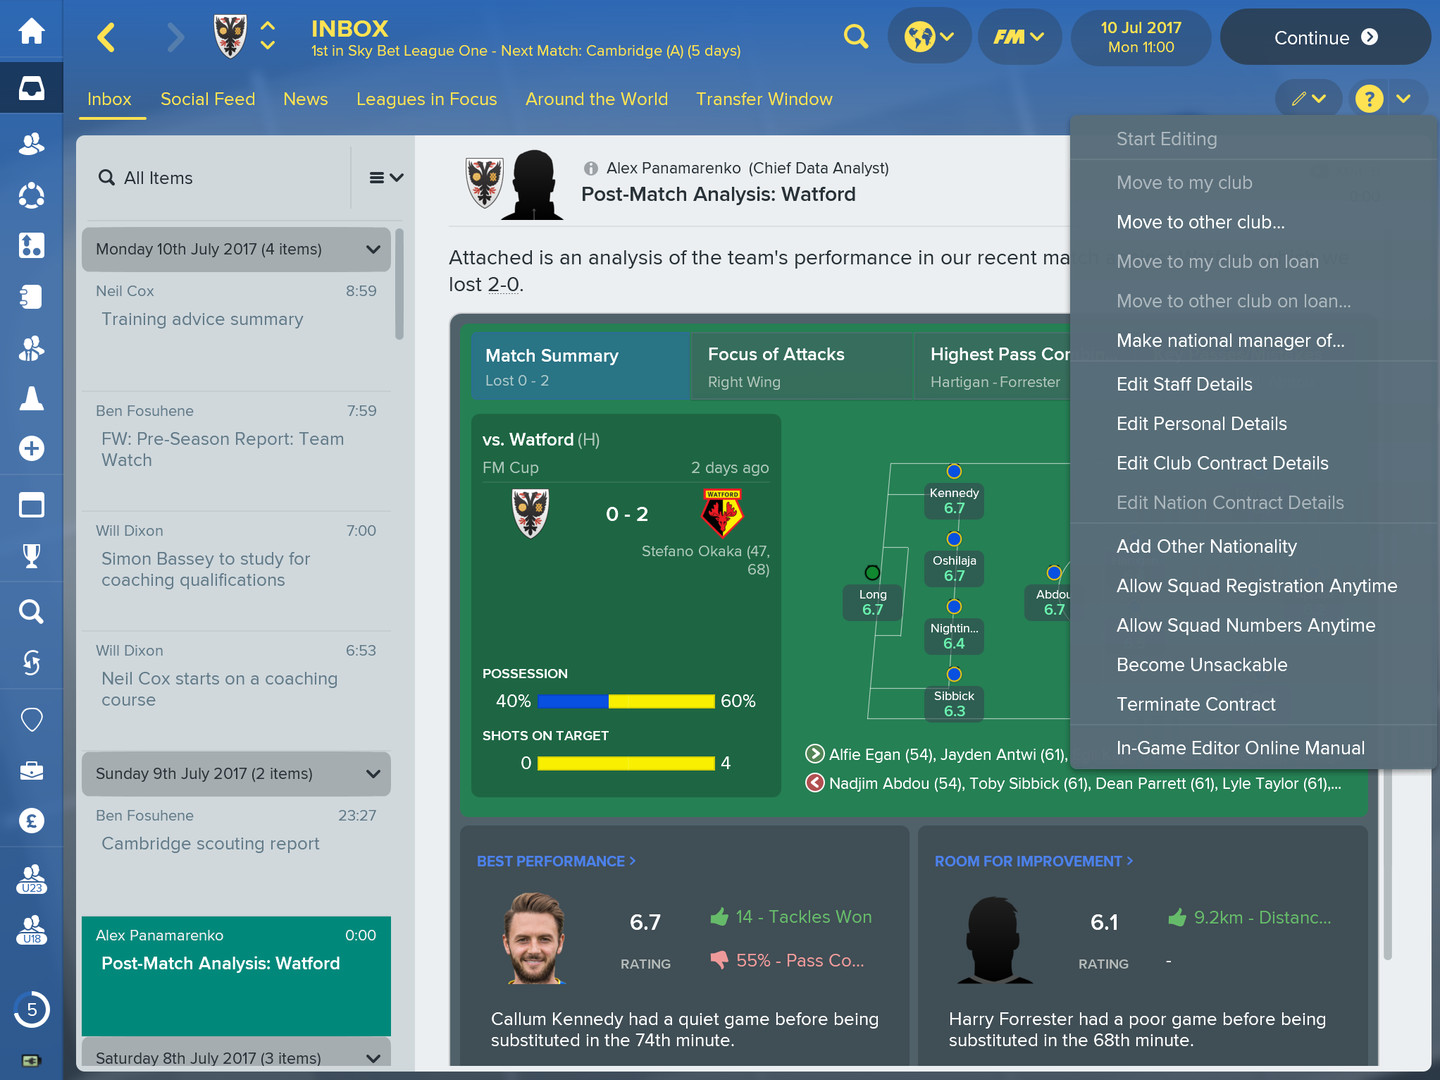 download steam workshop files in editor football manager